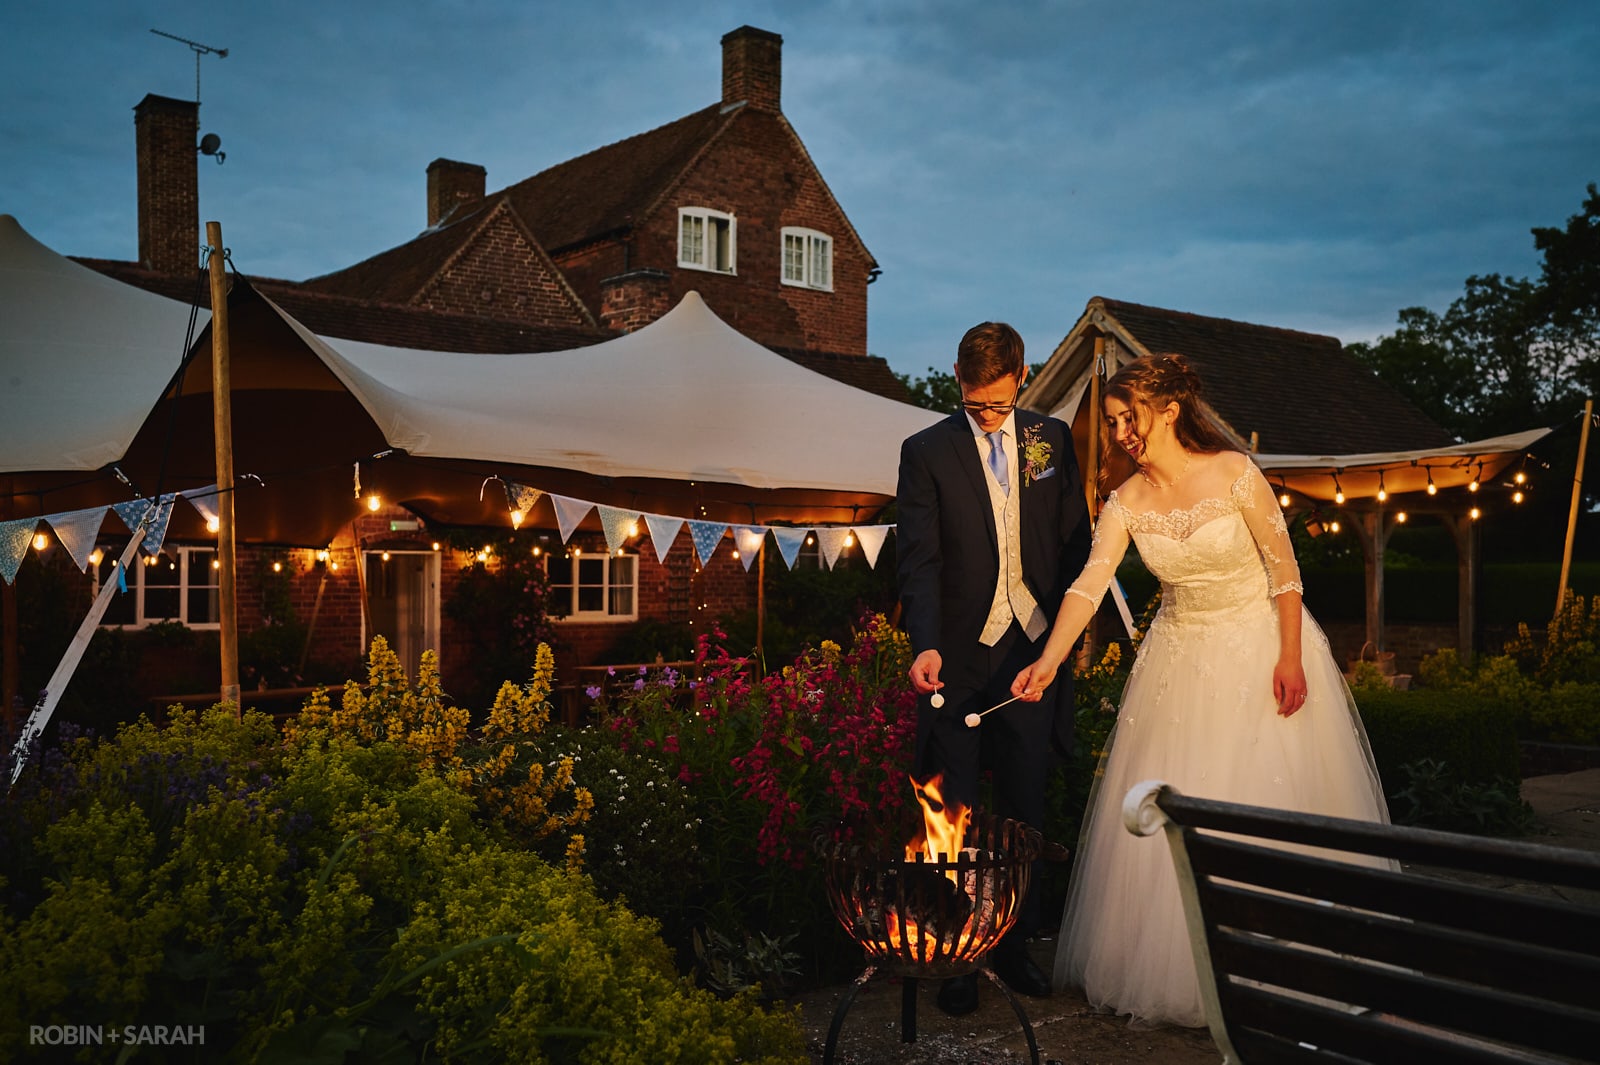 Bride and groom toast marshmallows on fire during evening wedding party